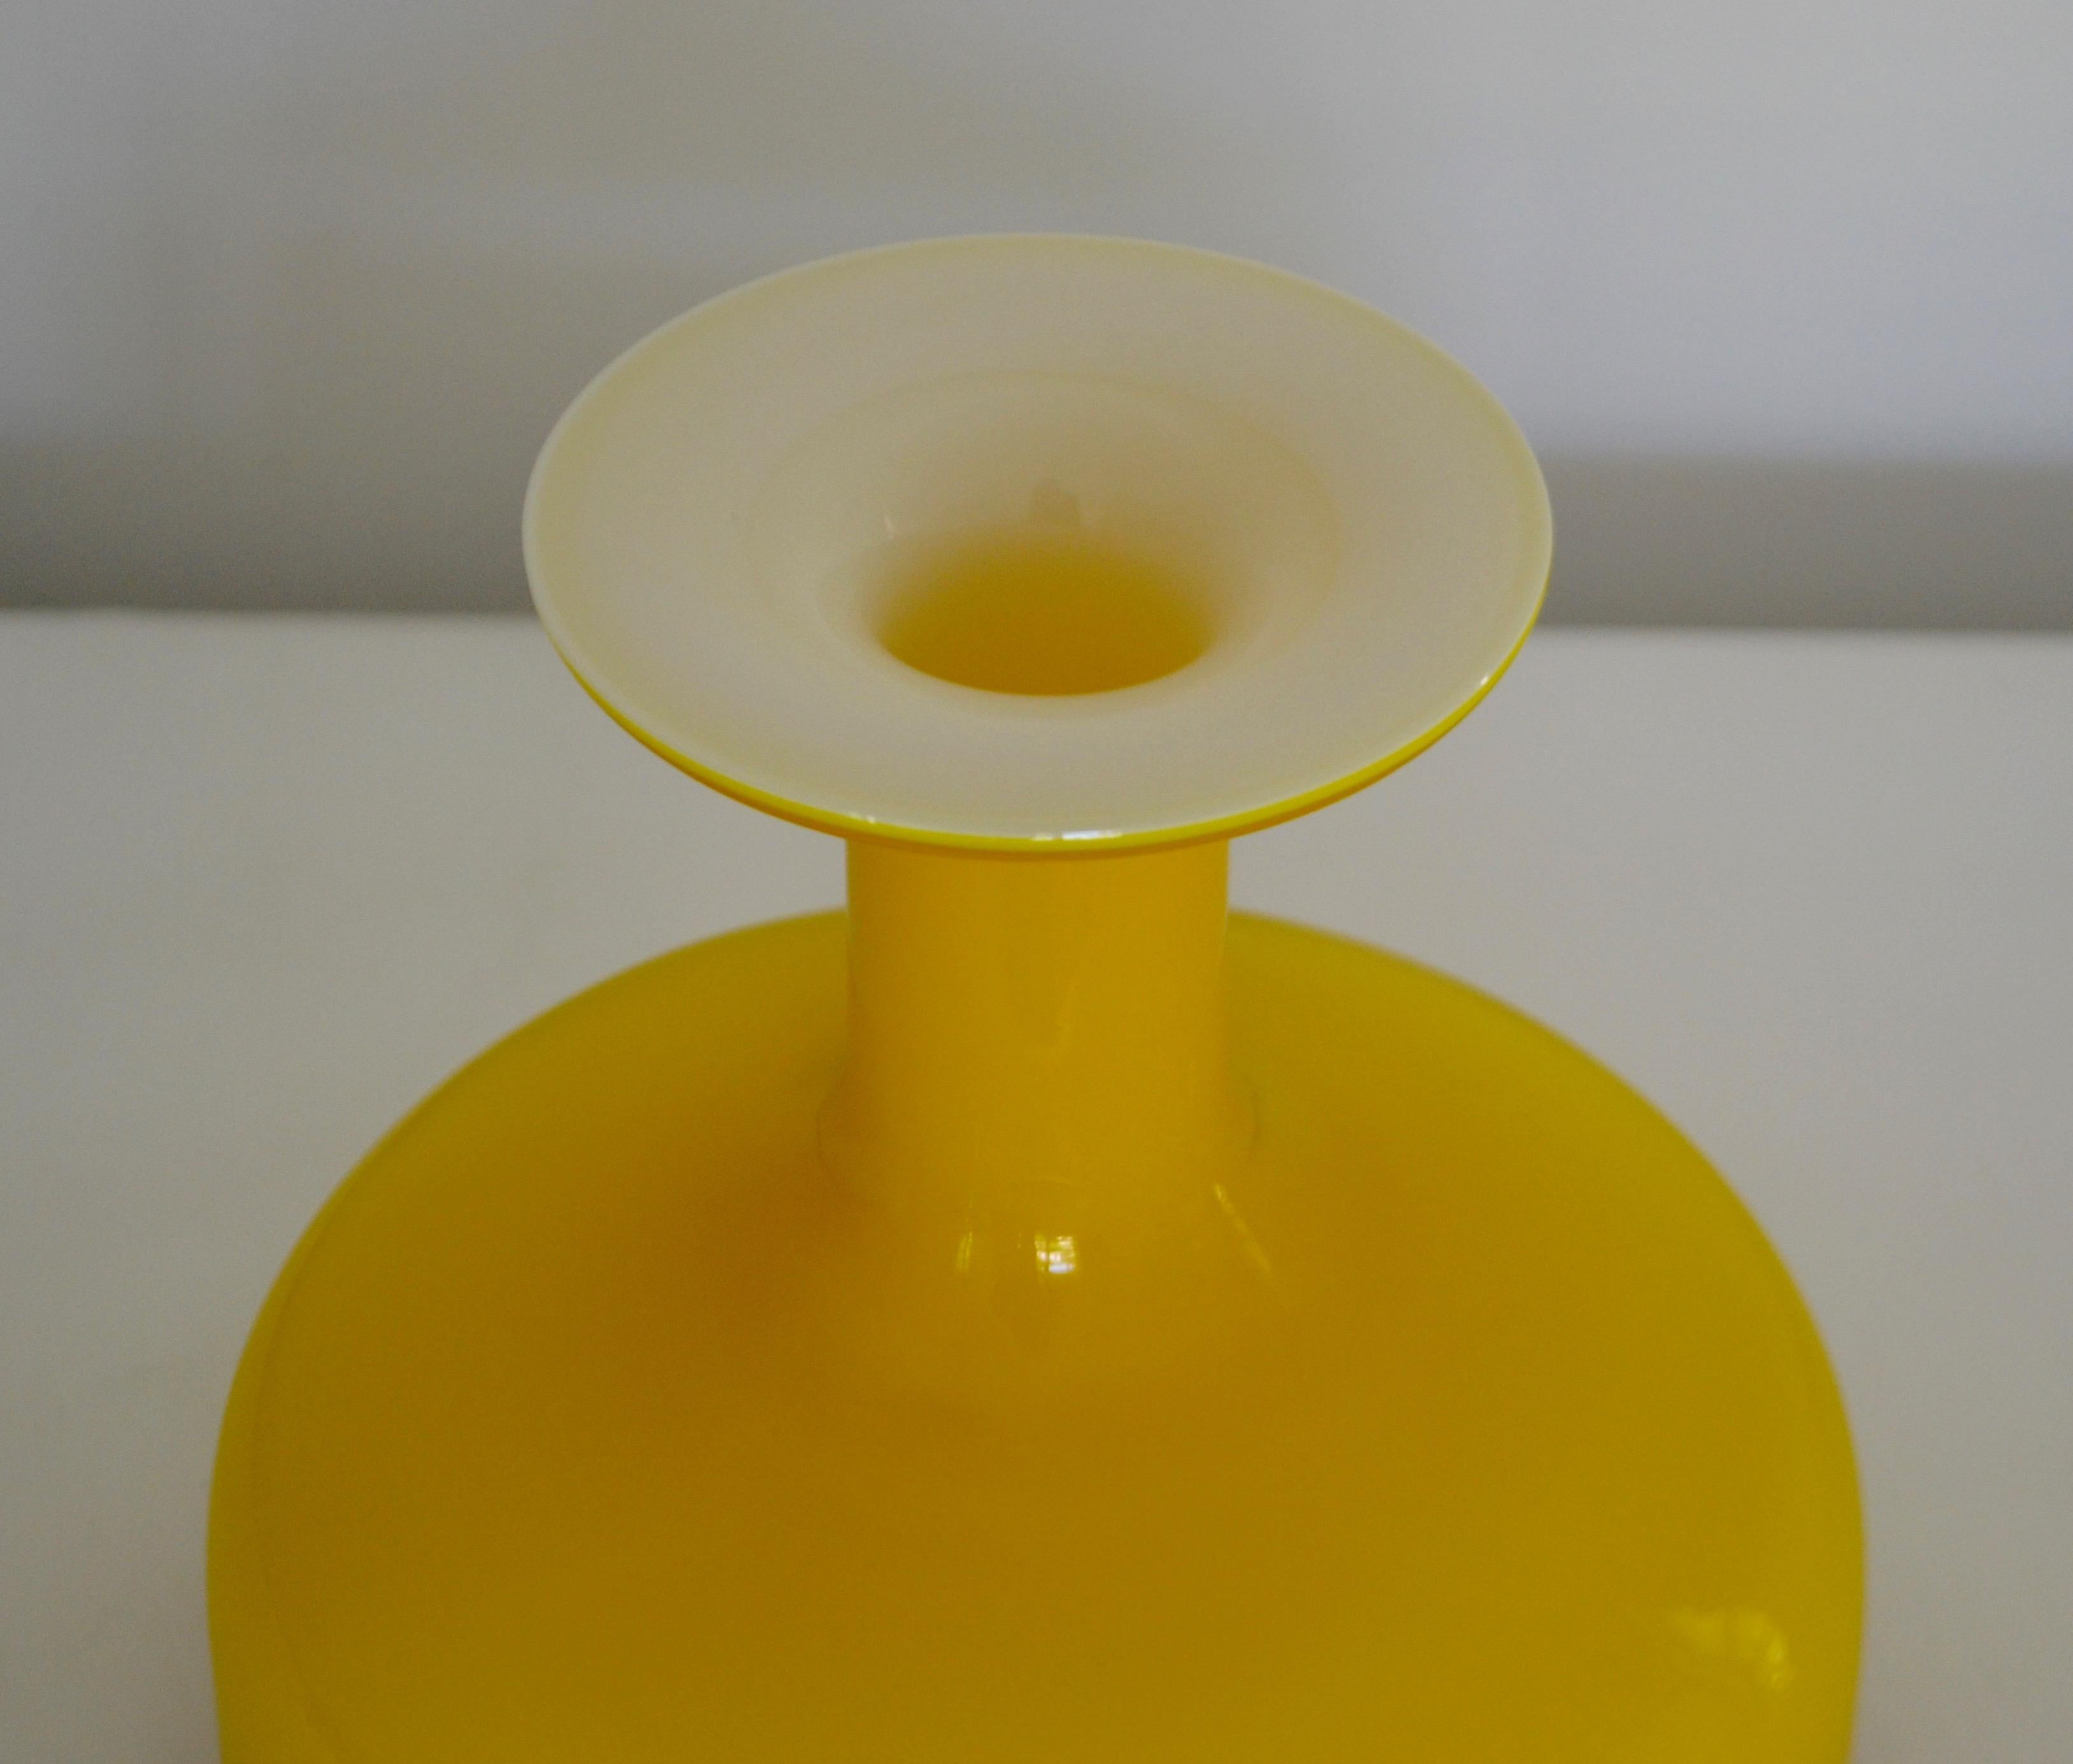 Midcentury Blown Glass Bottle Form Vase In Good Condition For Sale In West Palm Beach, FL